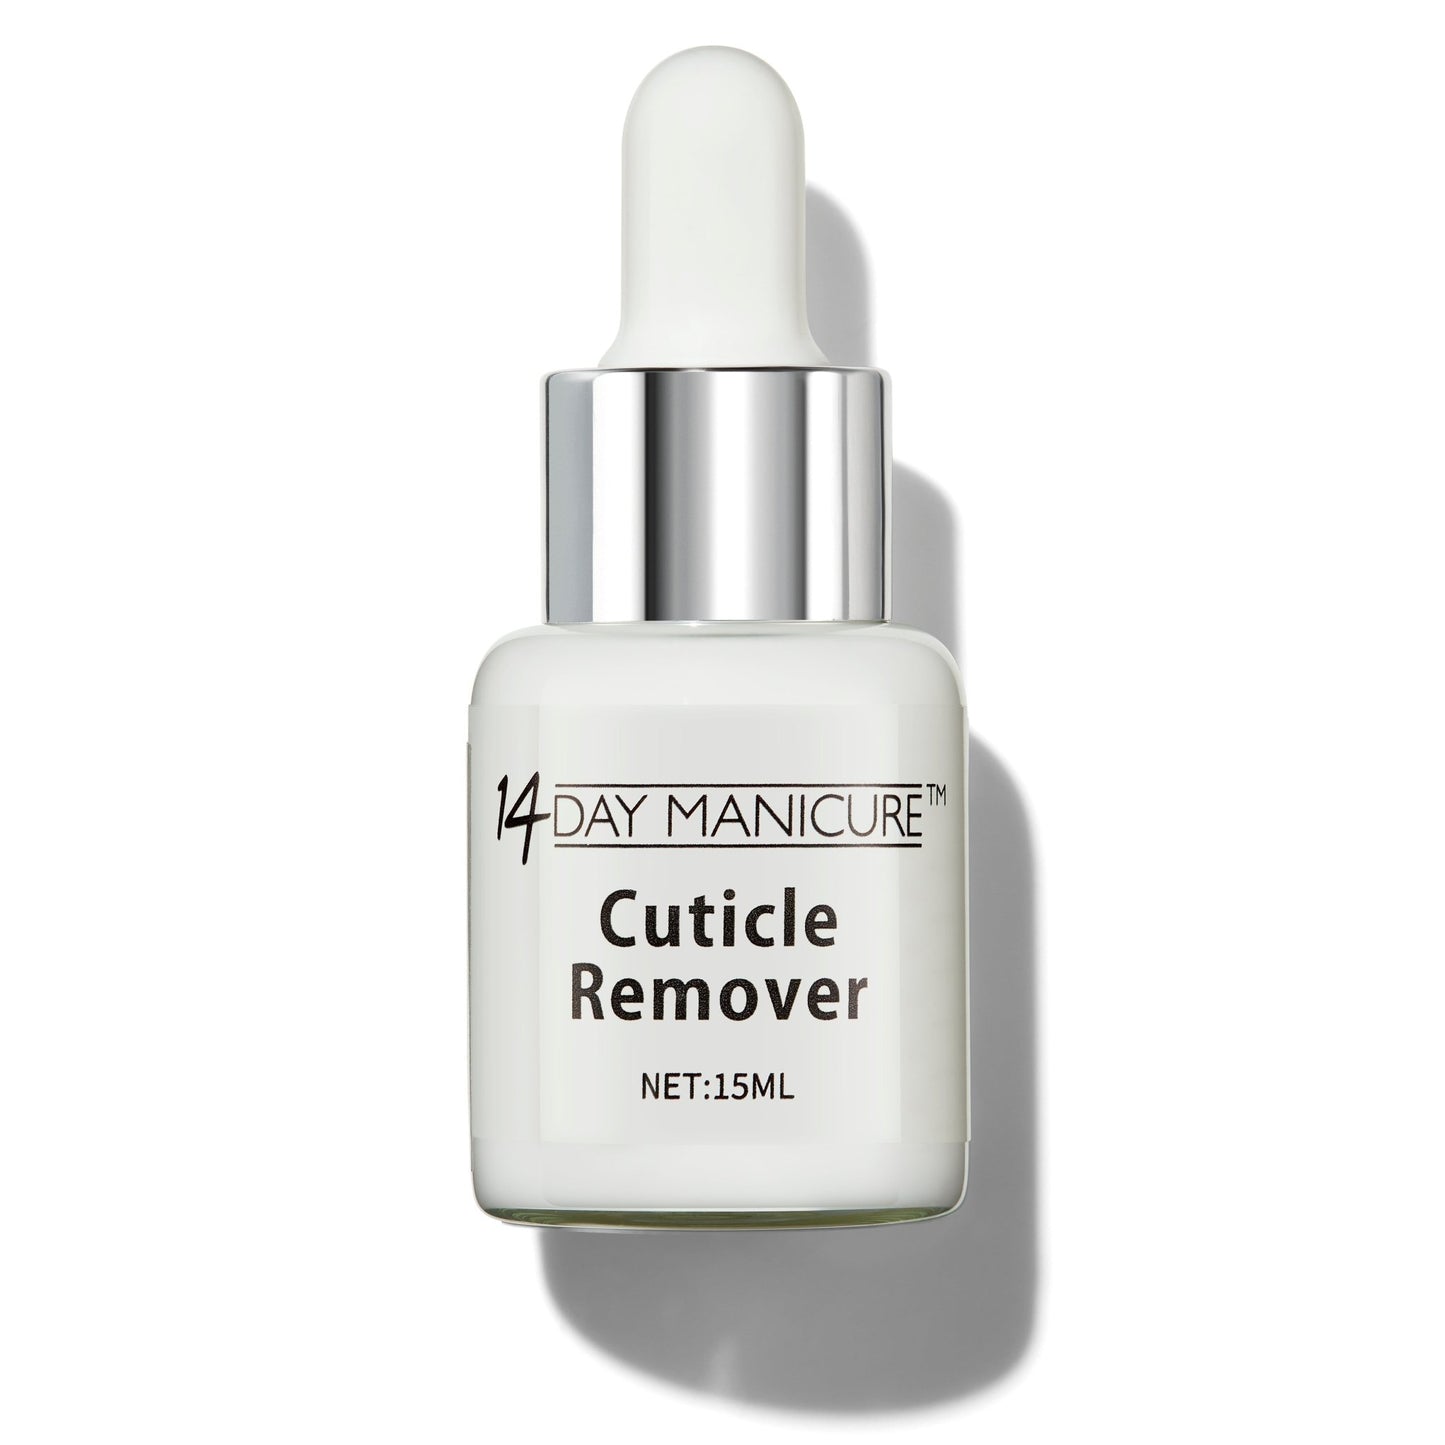 Instant Cuticle Remover - 14 Day Manicure - 1